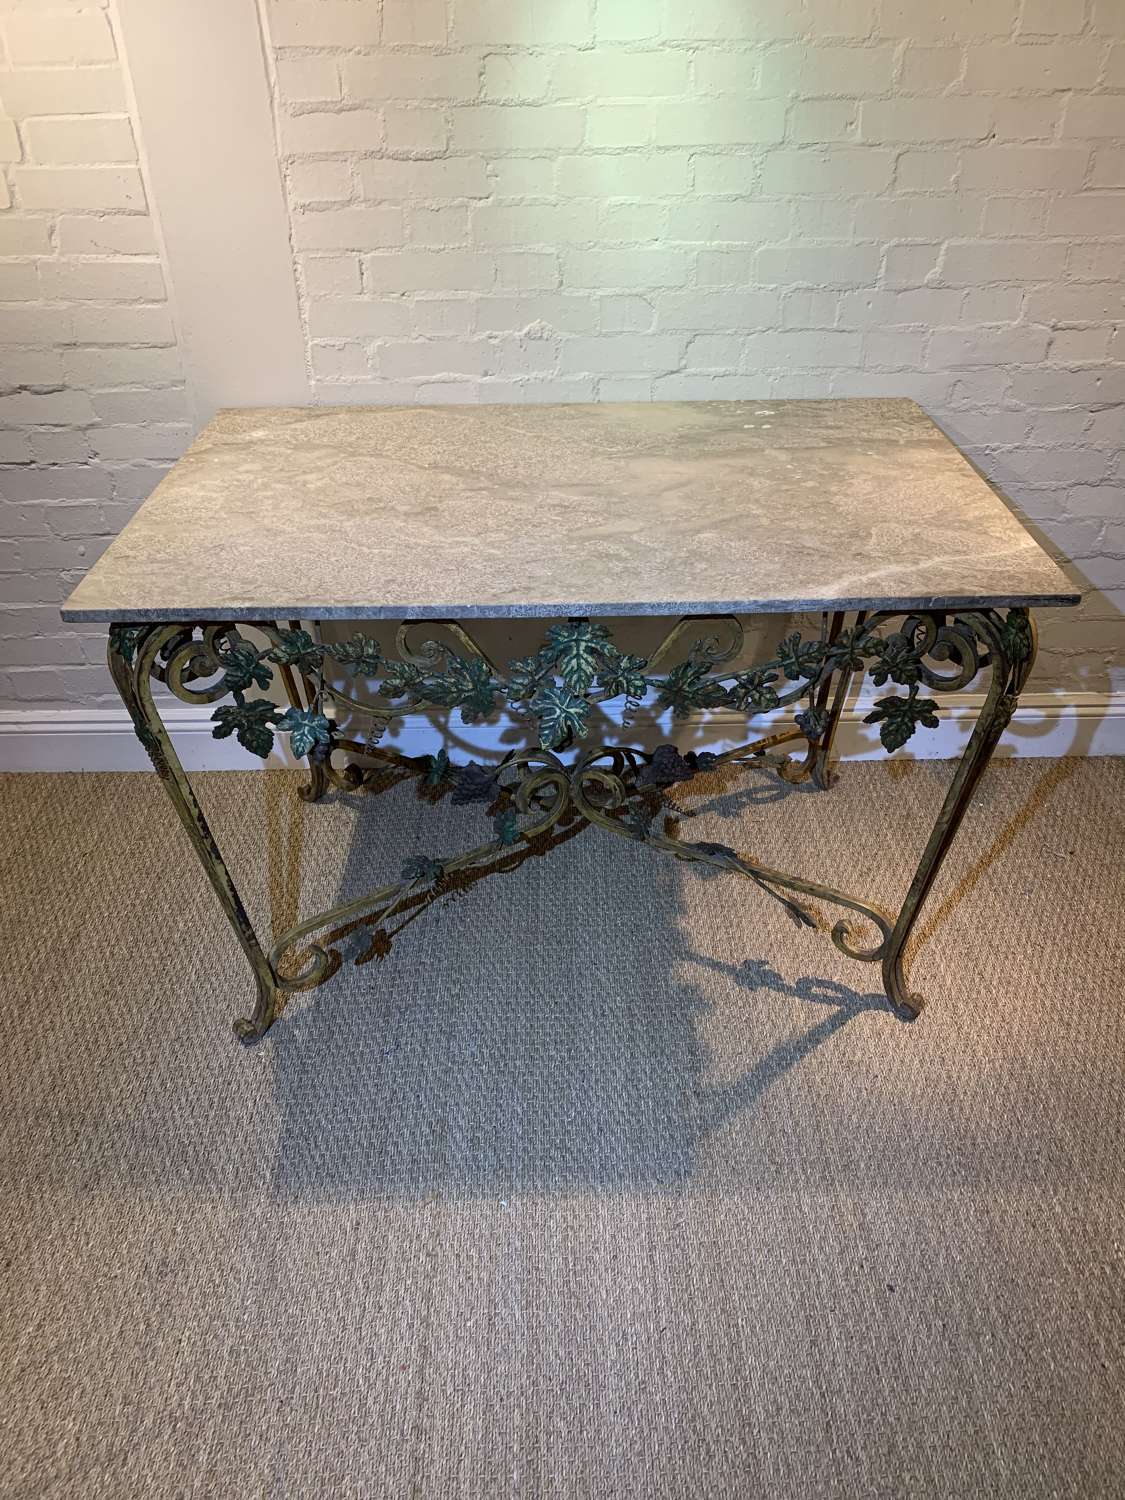 Mid 20th century French wrought iron table with leaf decoration